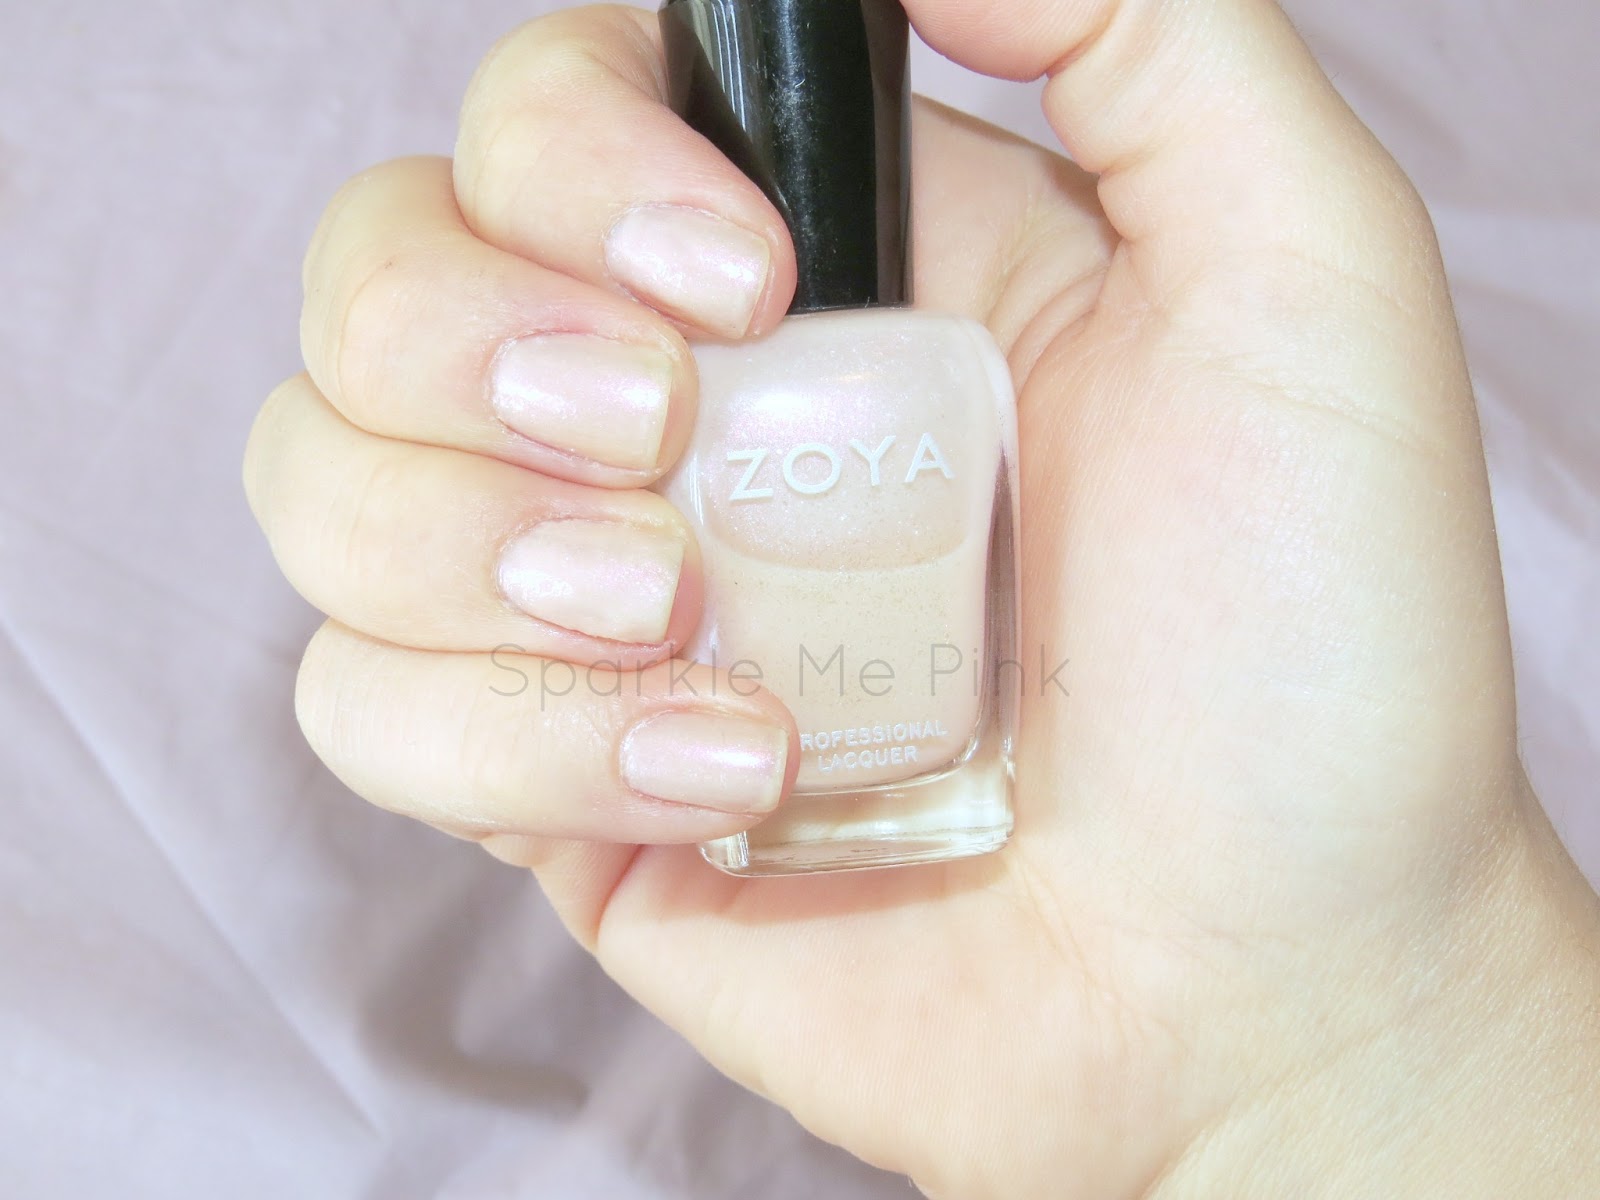 My First ZOYA Nail Polishes - Swatches and Review.